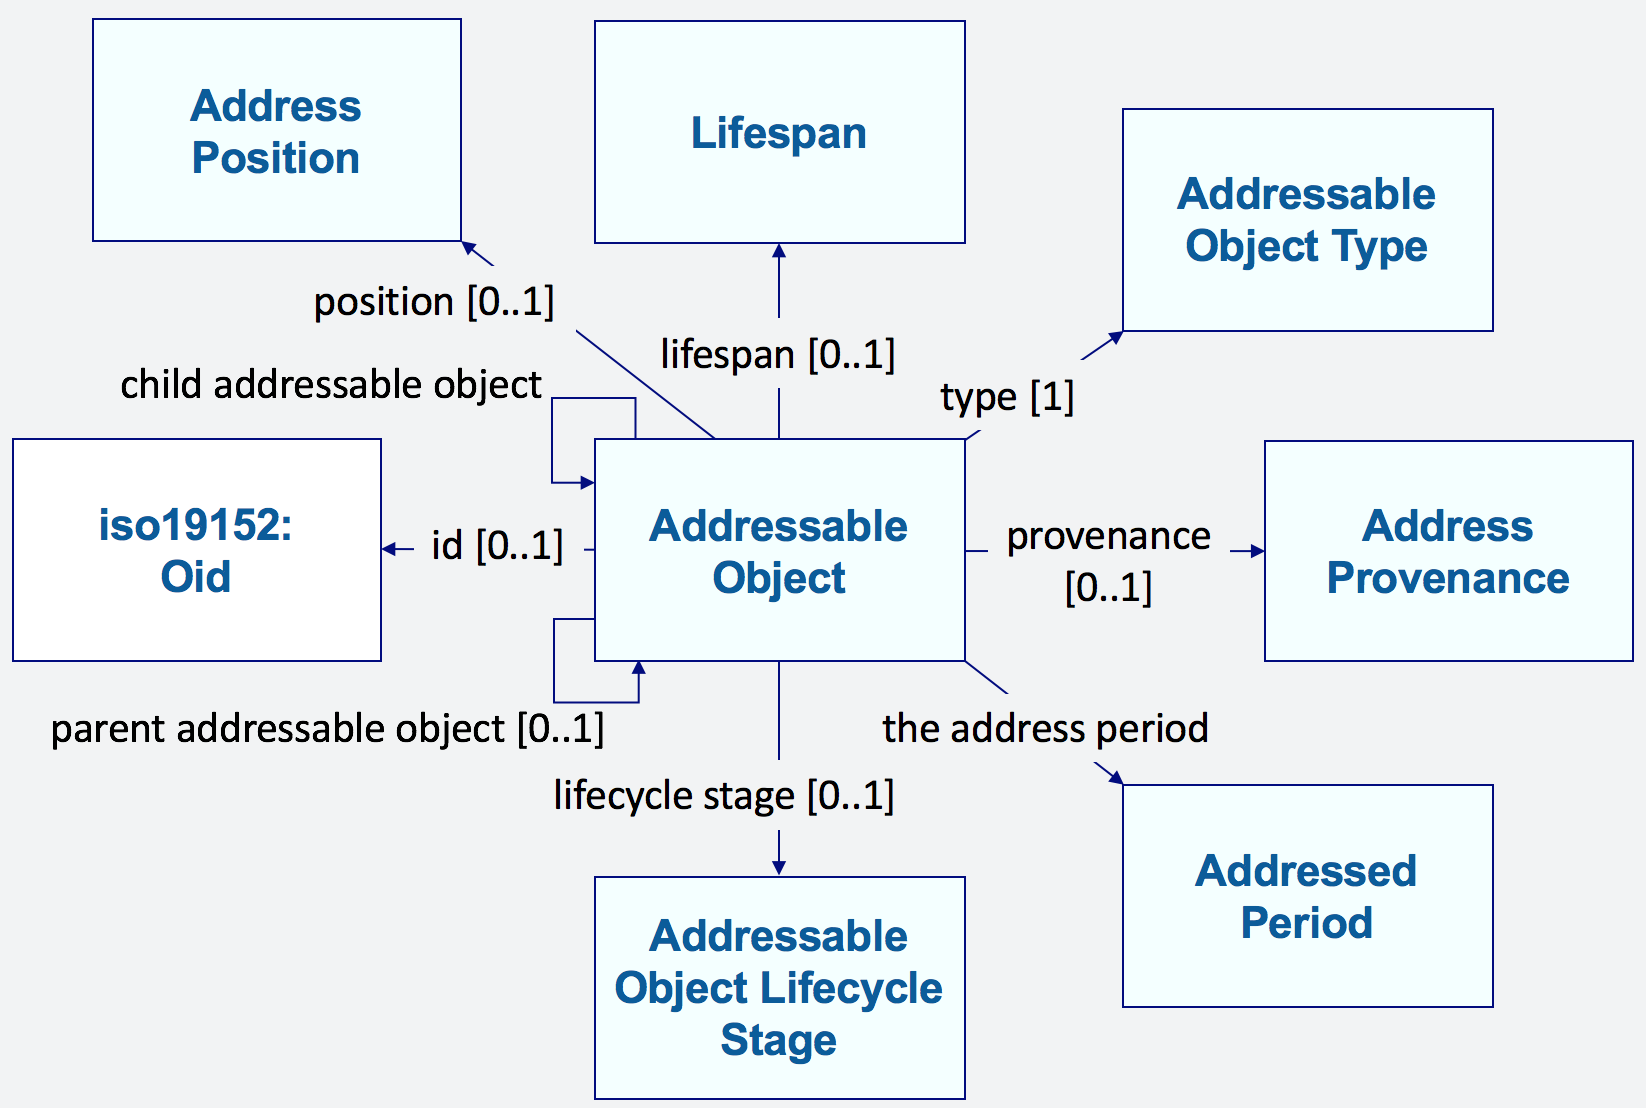 Addressable Object Class and Properties